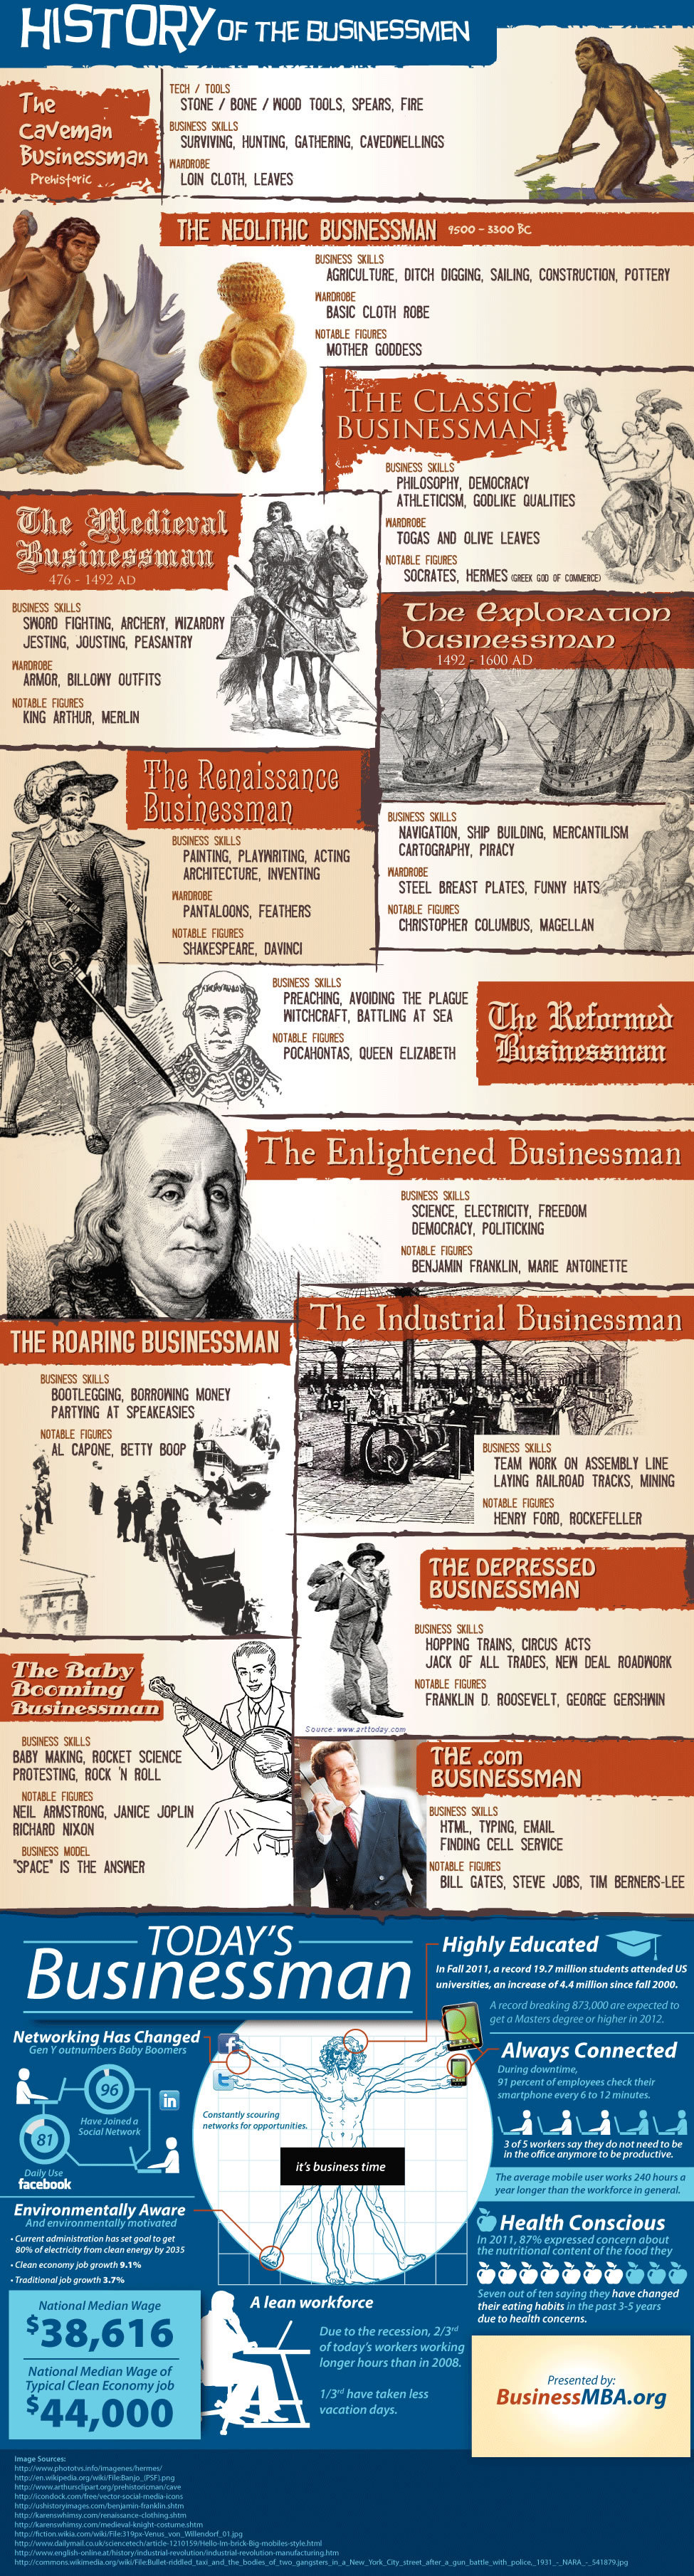 History of the Businessman